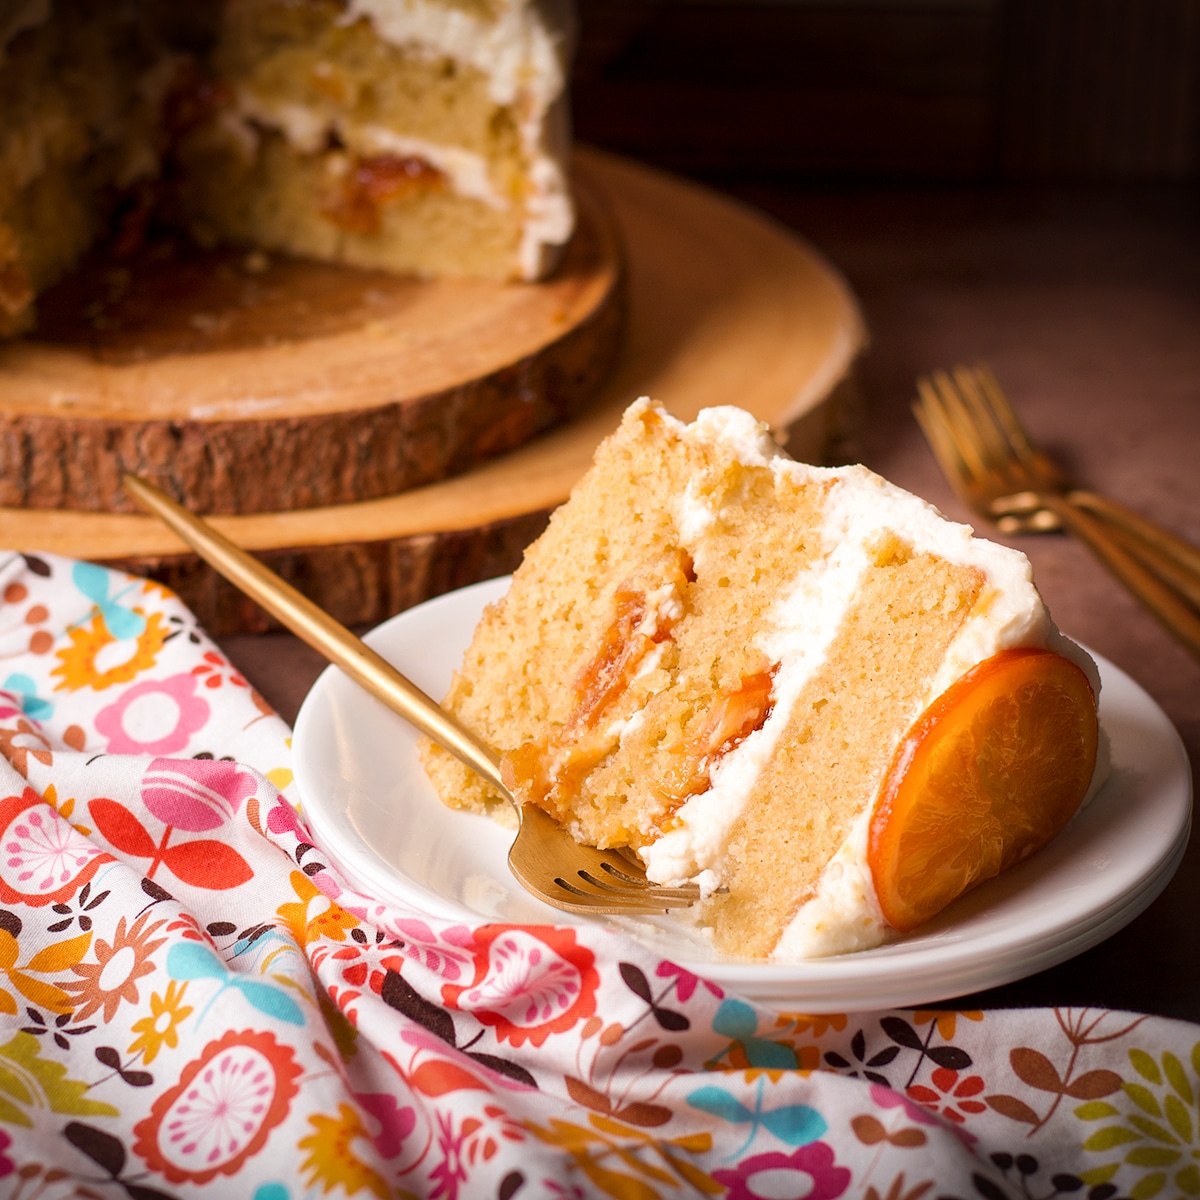 A slice of 3-layer orange olive oil cake filled with orange marmalade and covered in mascarpone frosting.